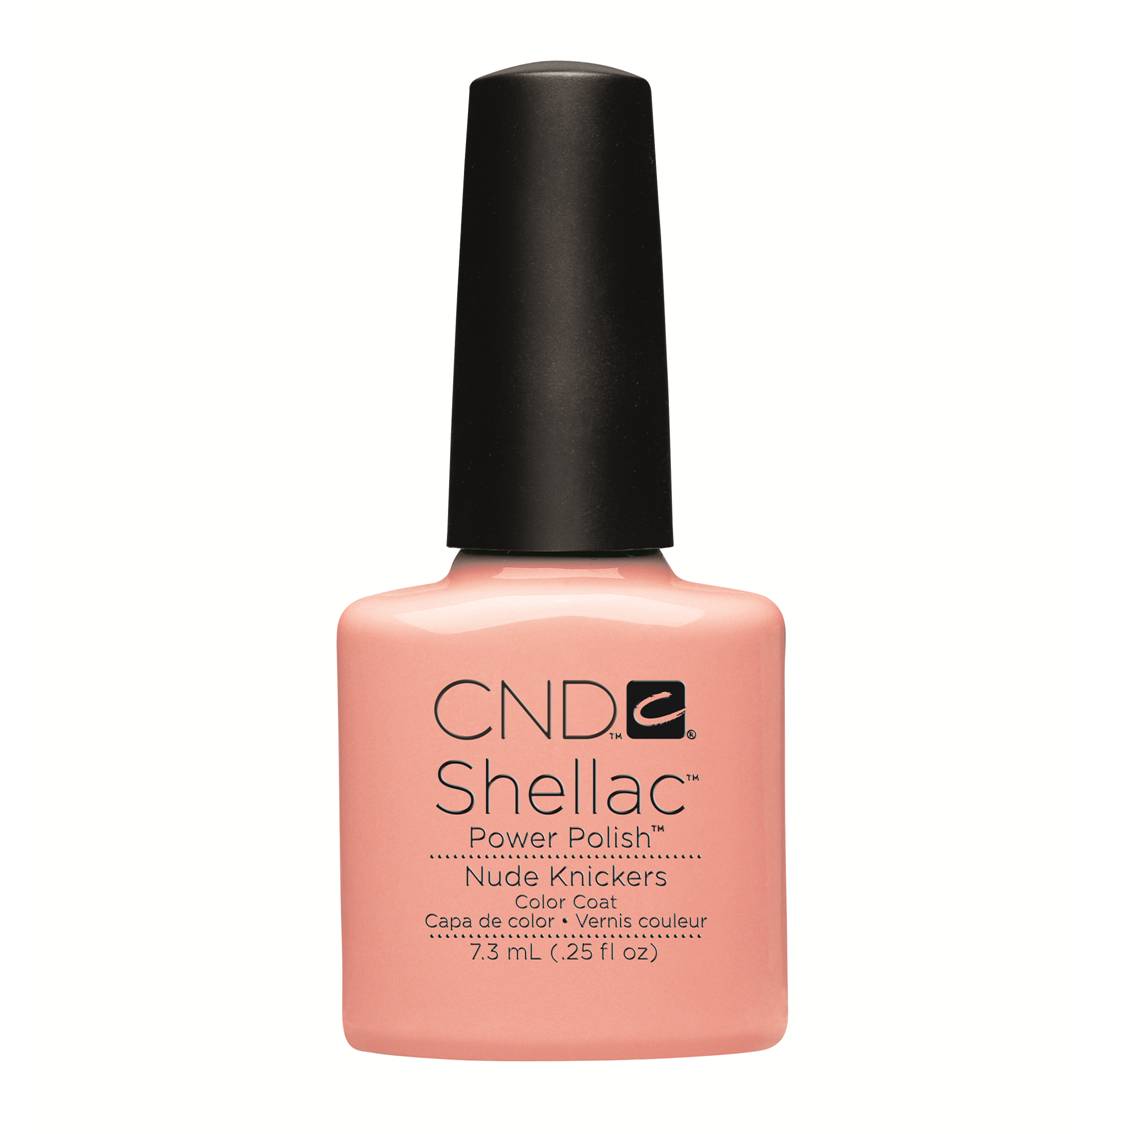 CND™ SHELLAC™ Nude Knickers